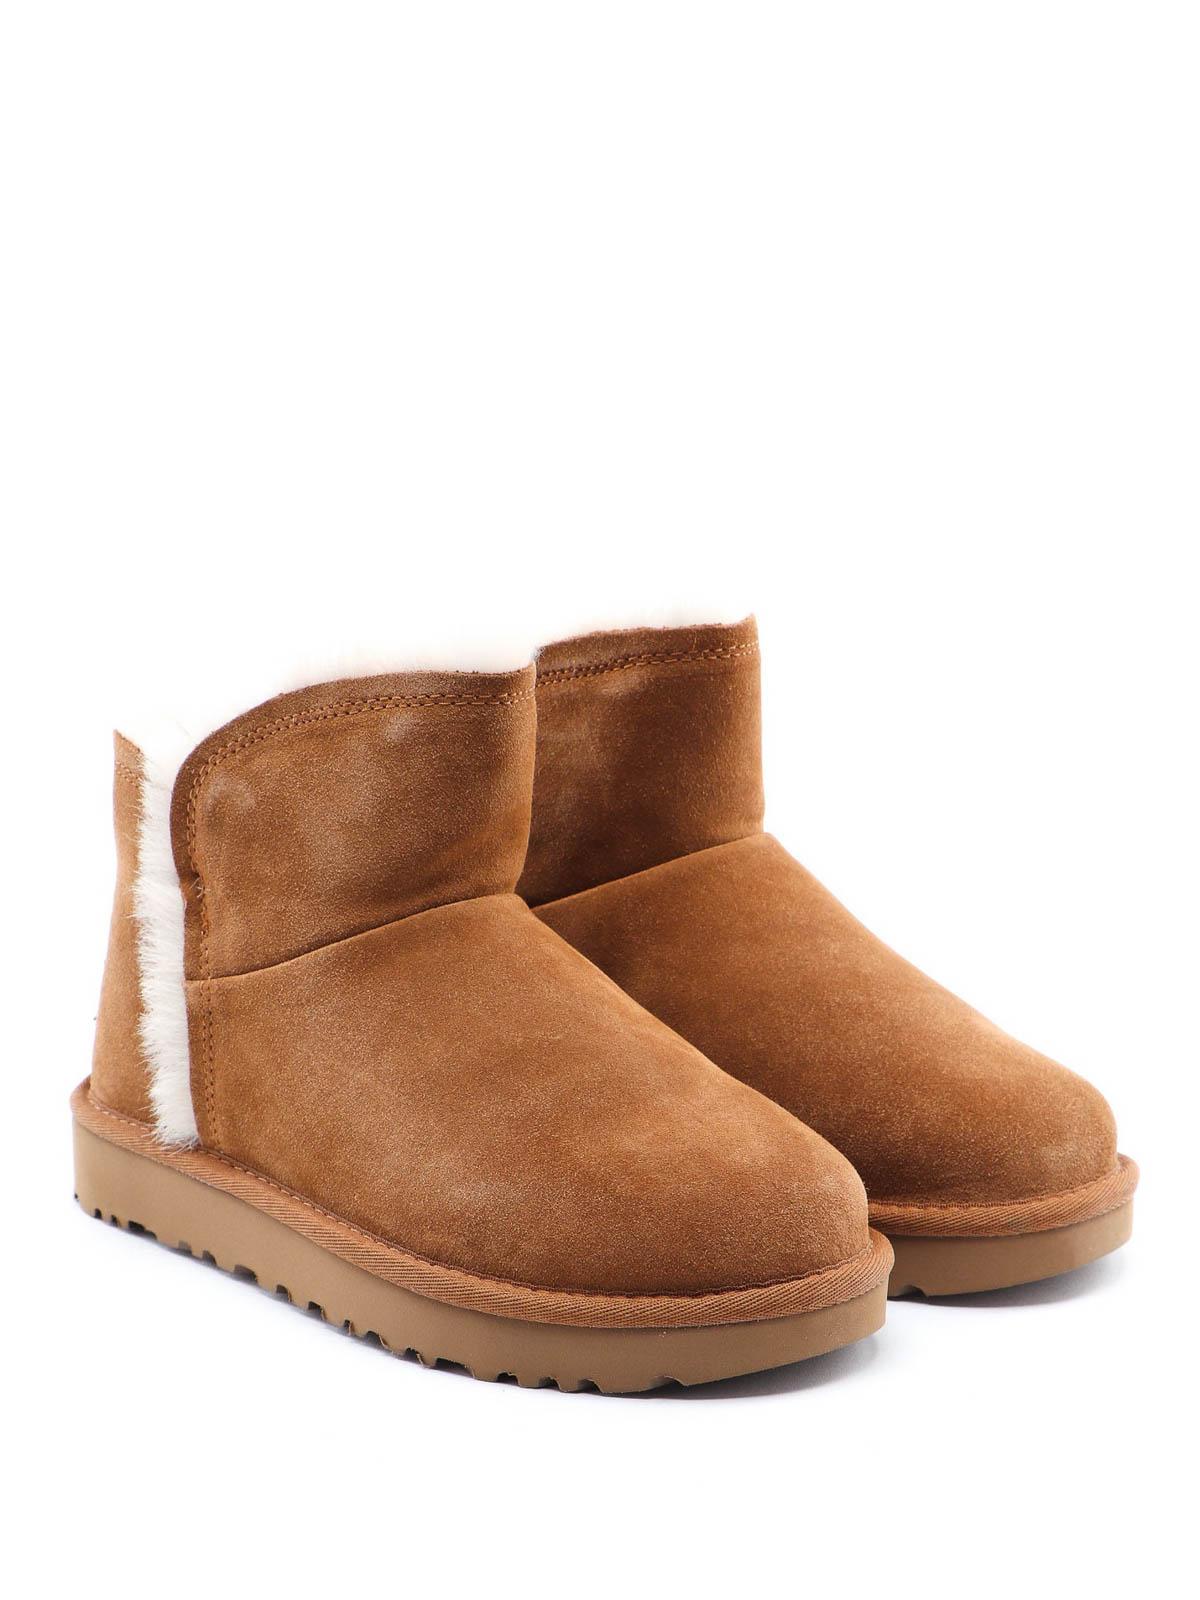 UGG Suede Classic Mini Fluff High-low Ankle Boots in Light Brown (Brown ...